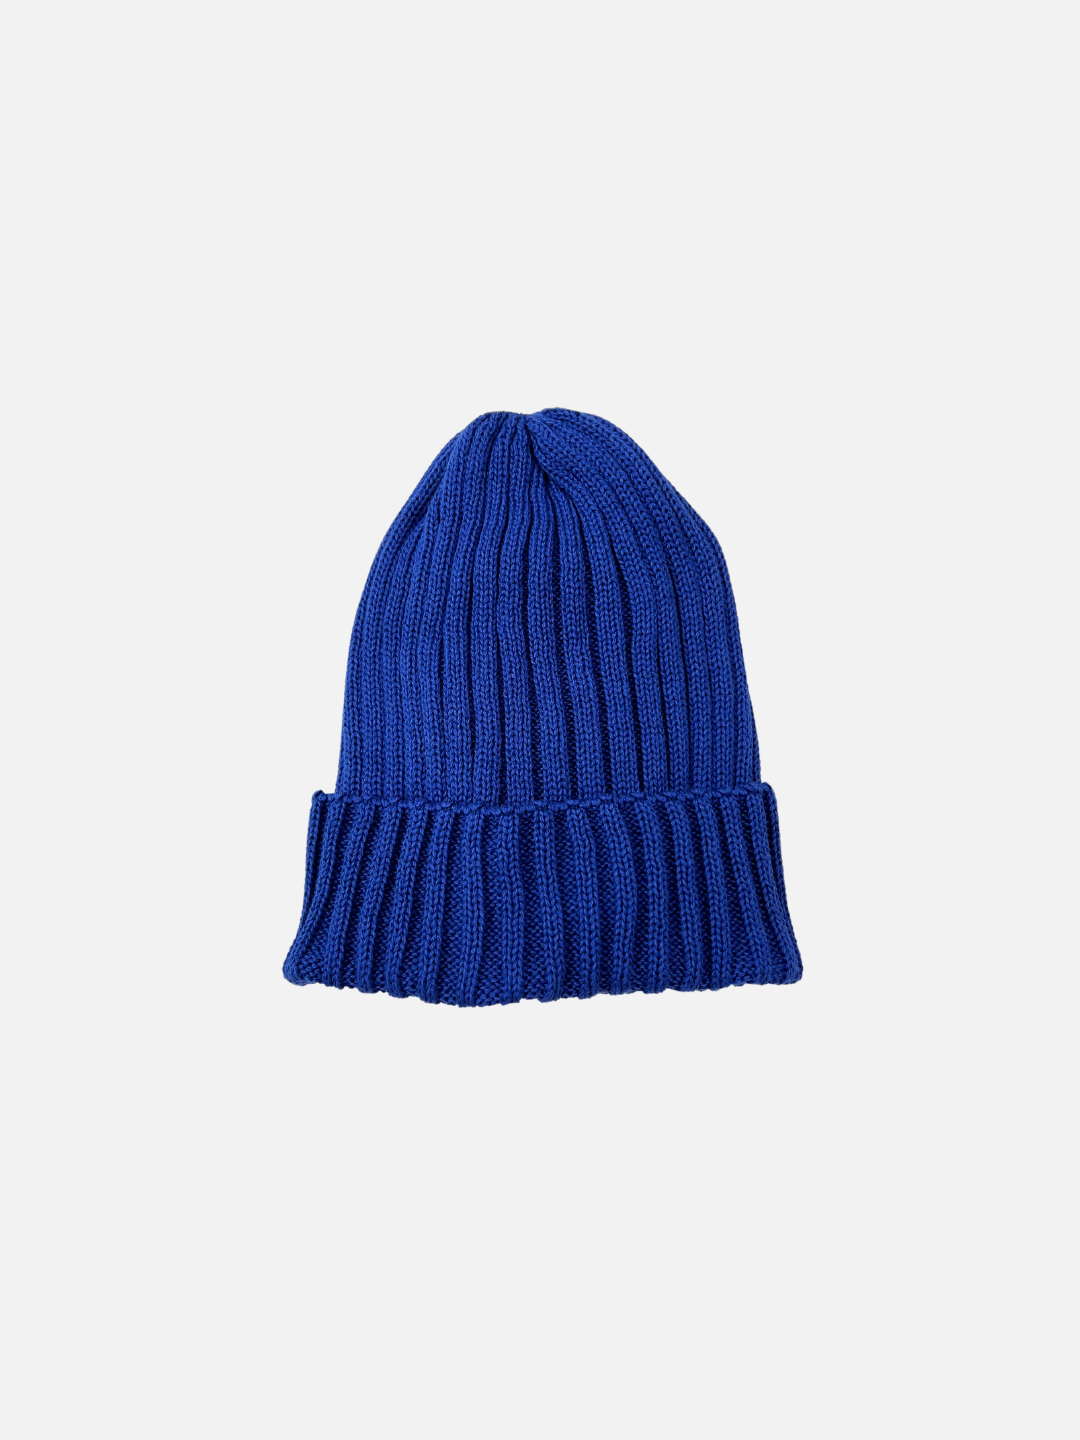 Blue | Front view of the Blue Spring Rib Knit Baby Beanie